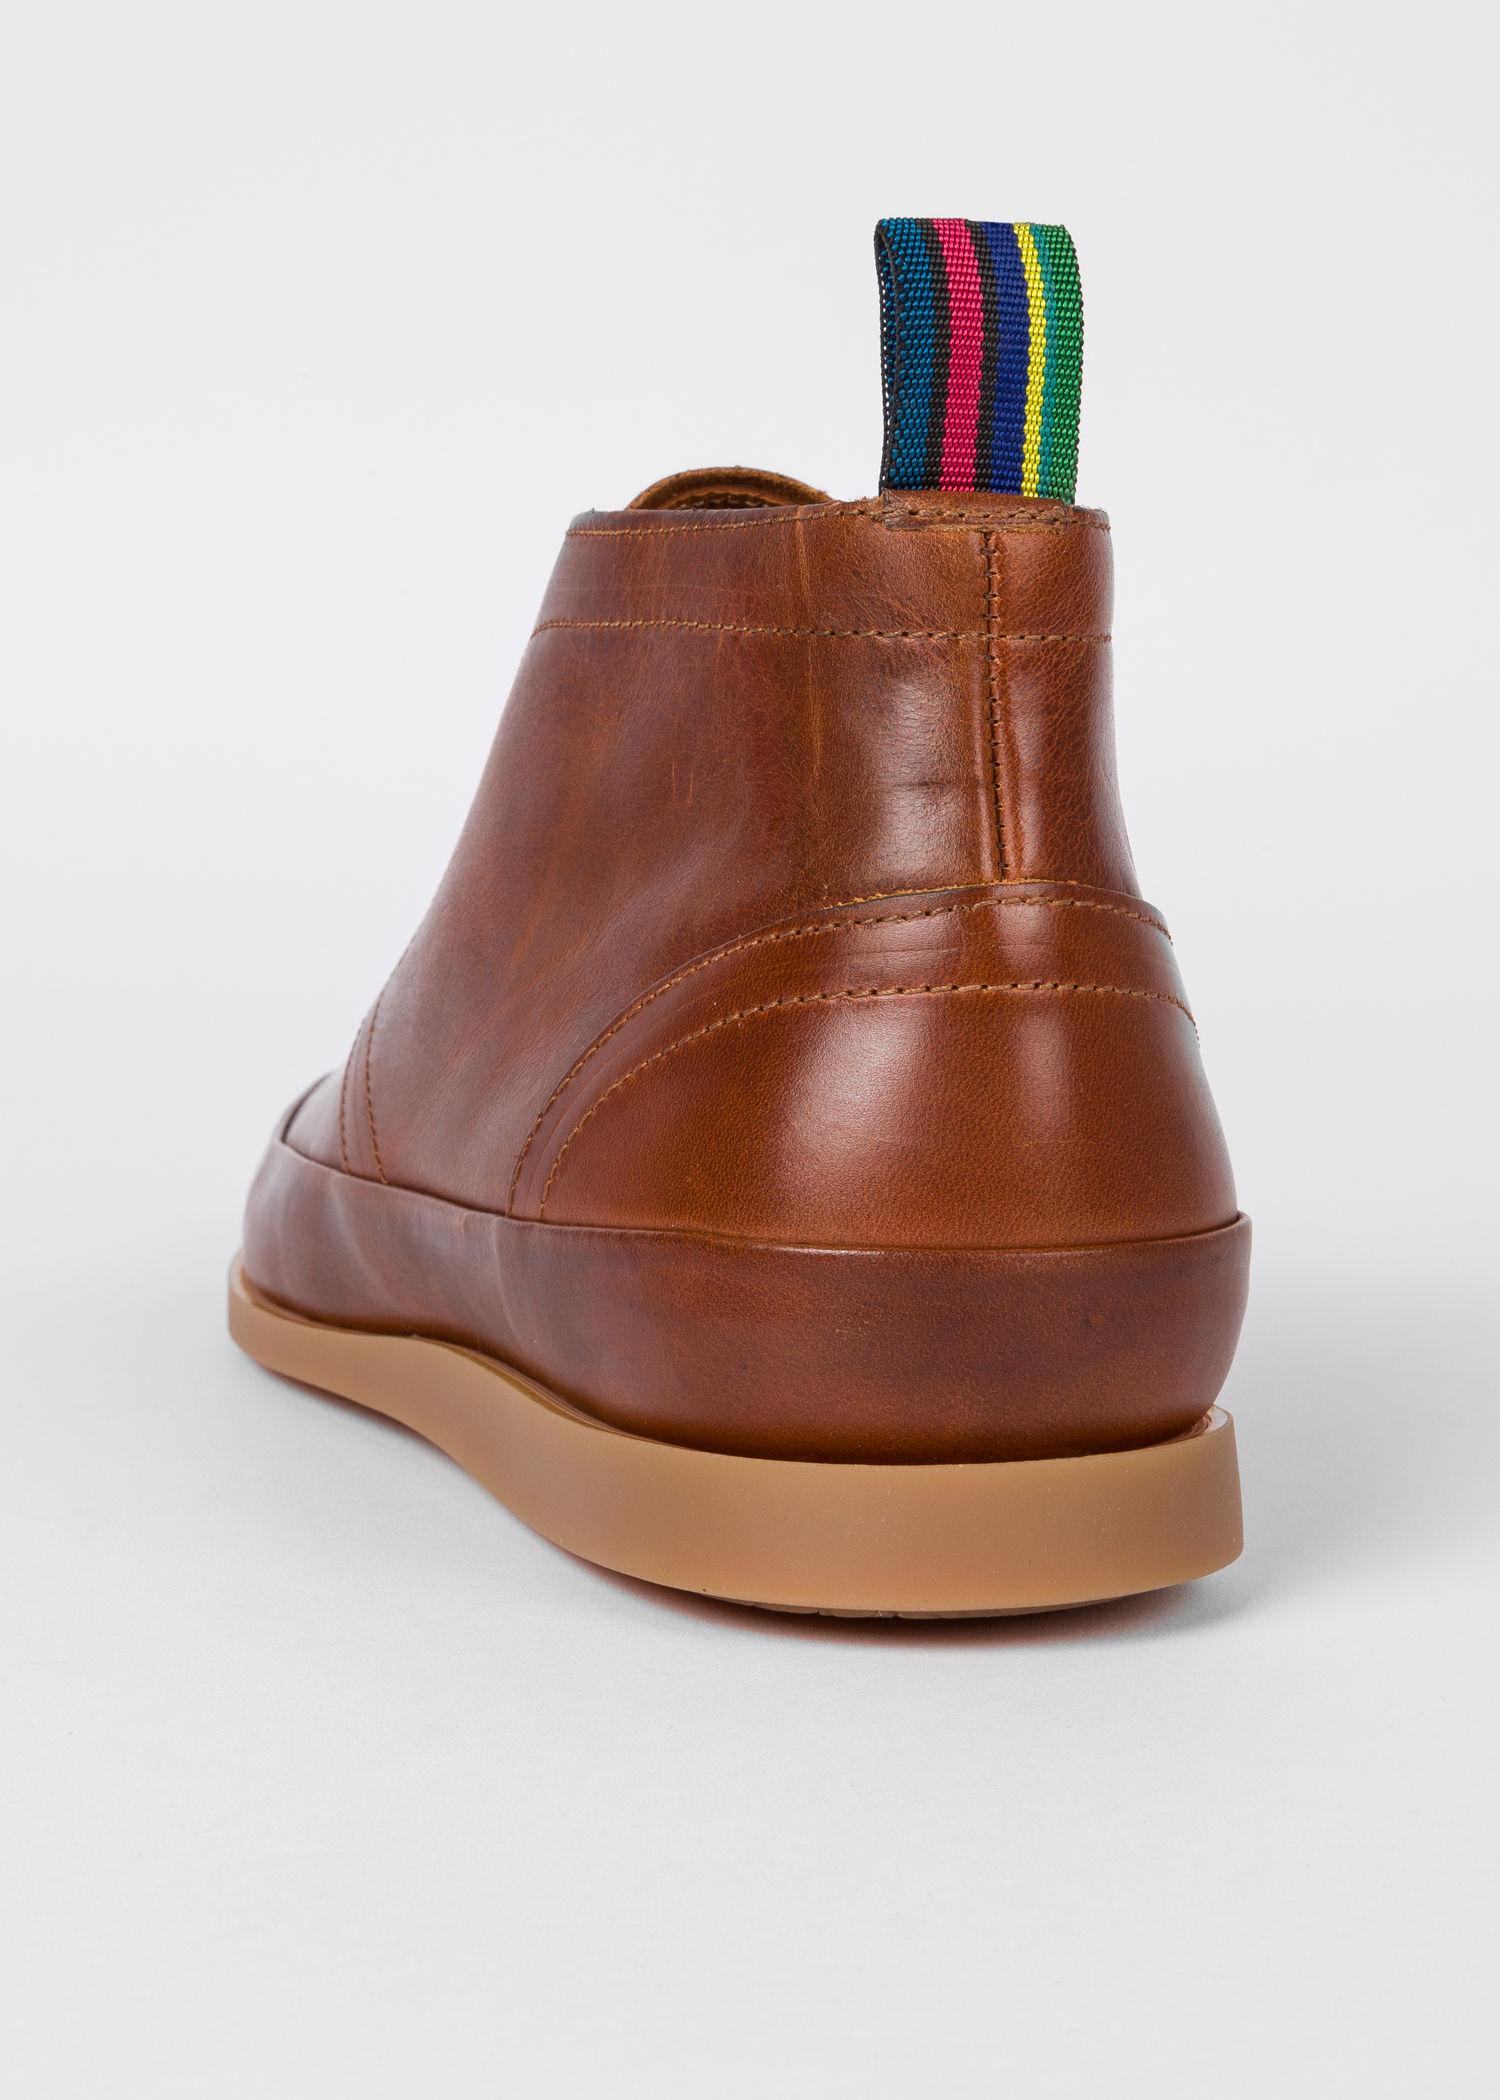 Paul Smith Tan Leather 'cleon' Boots in Brown for Men - Lyst